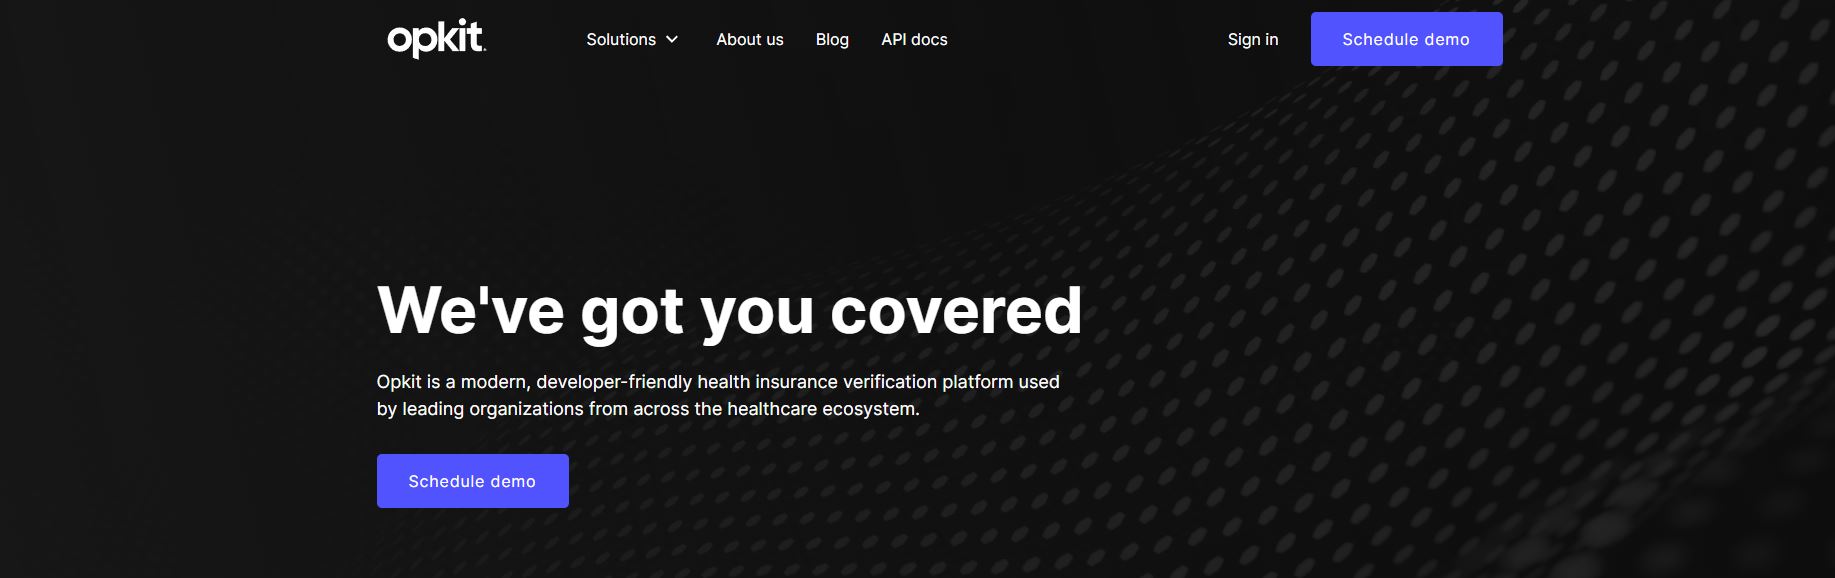 Opkit is a modern healthcare technology and they have recently raised $1M in funding